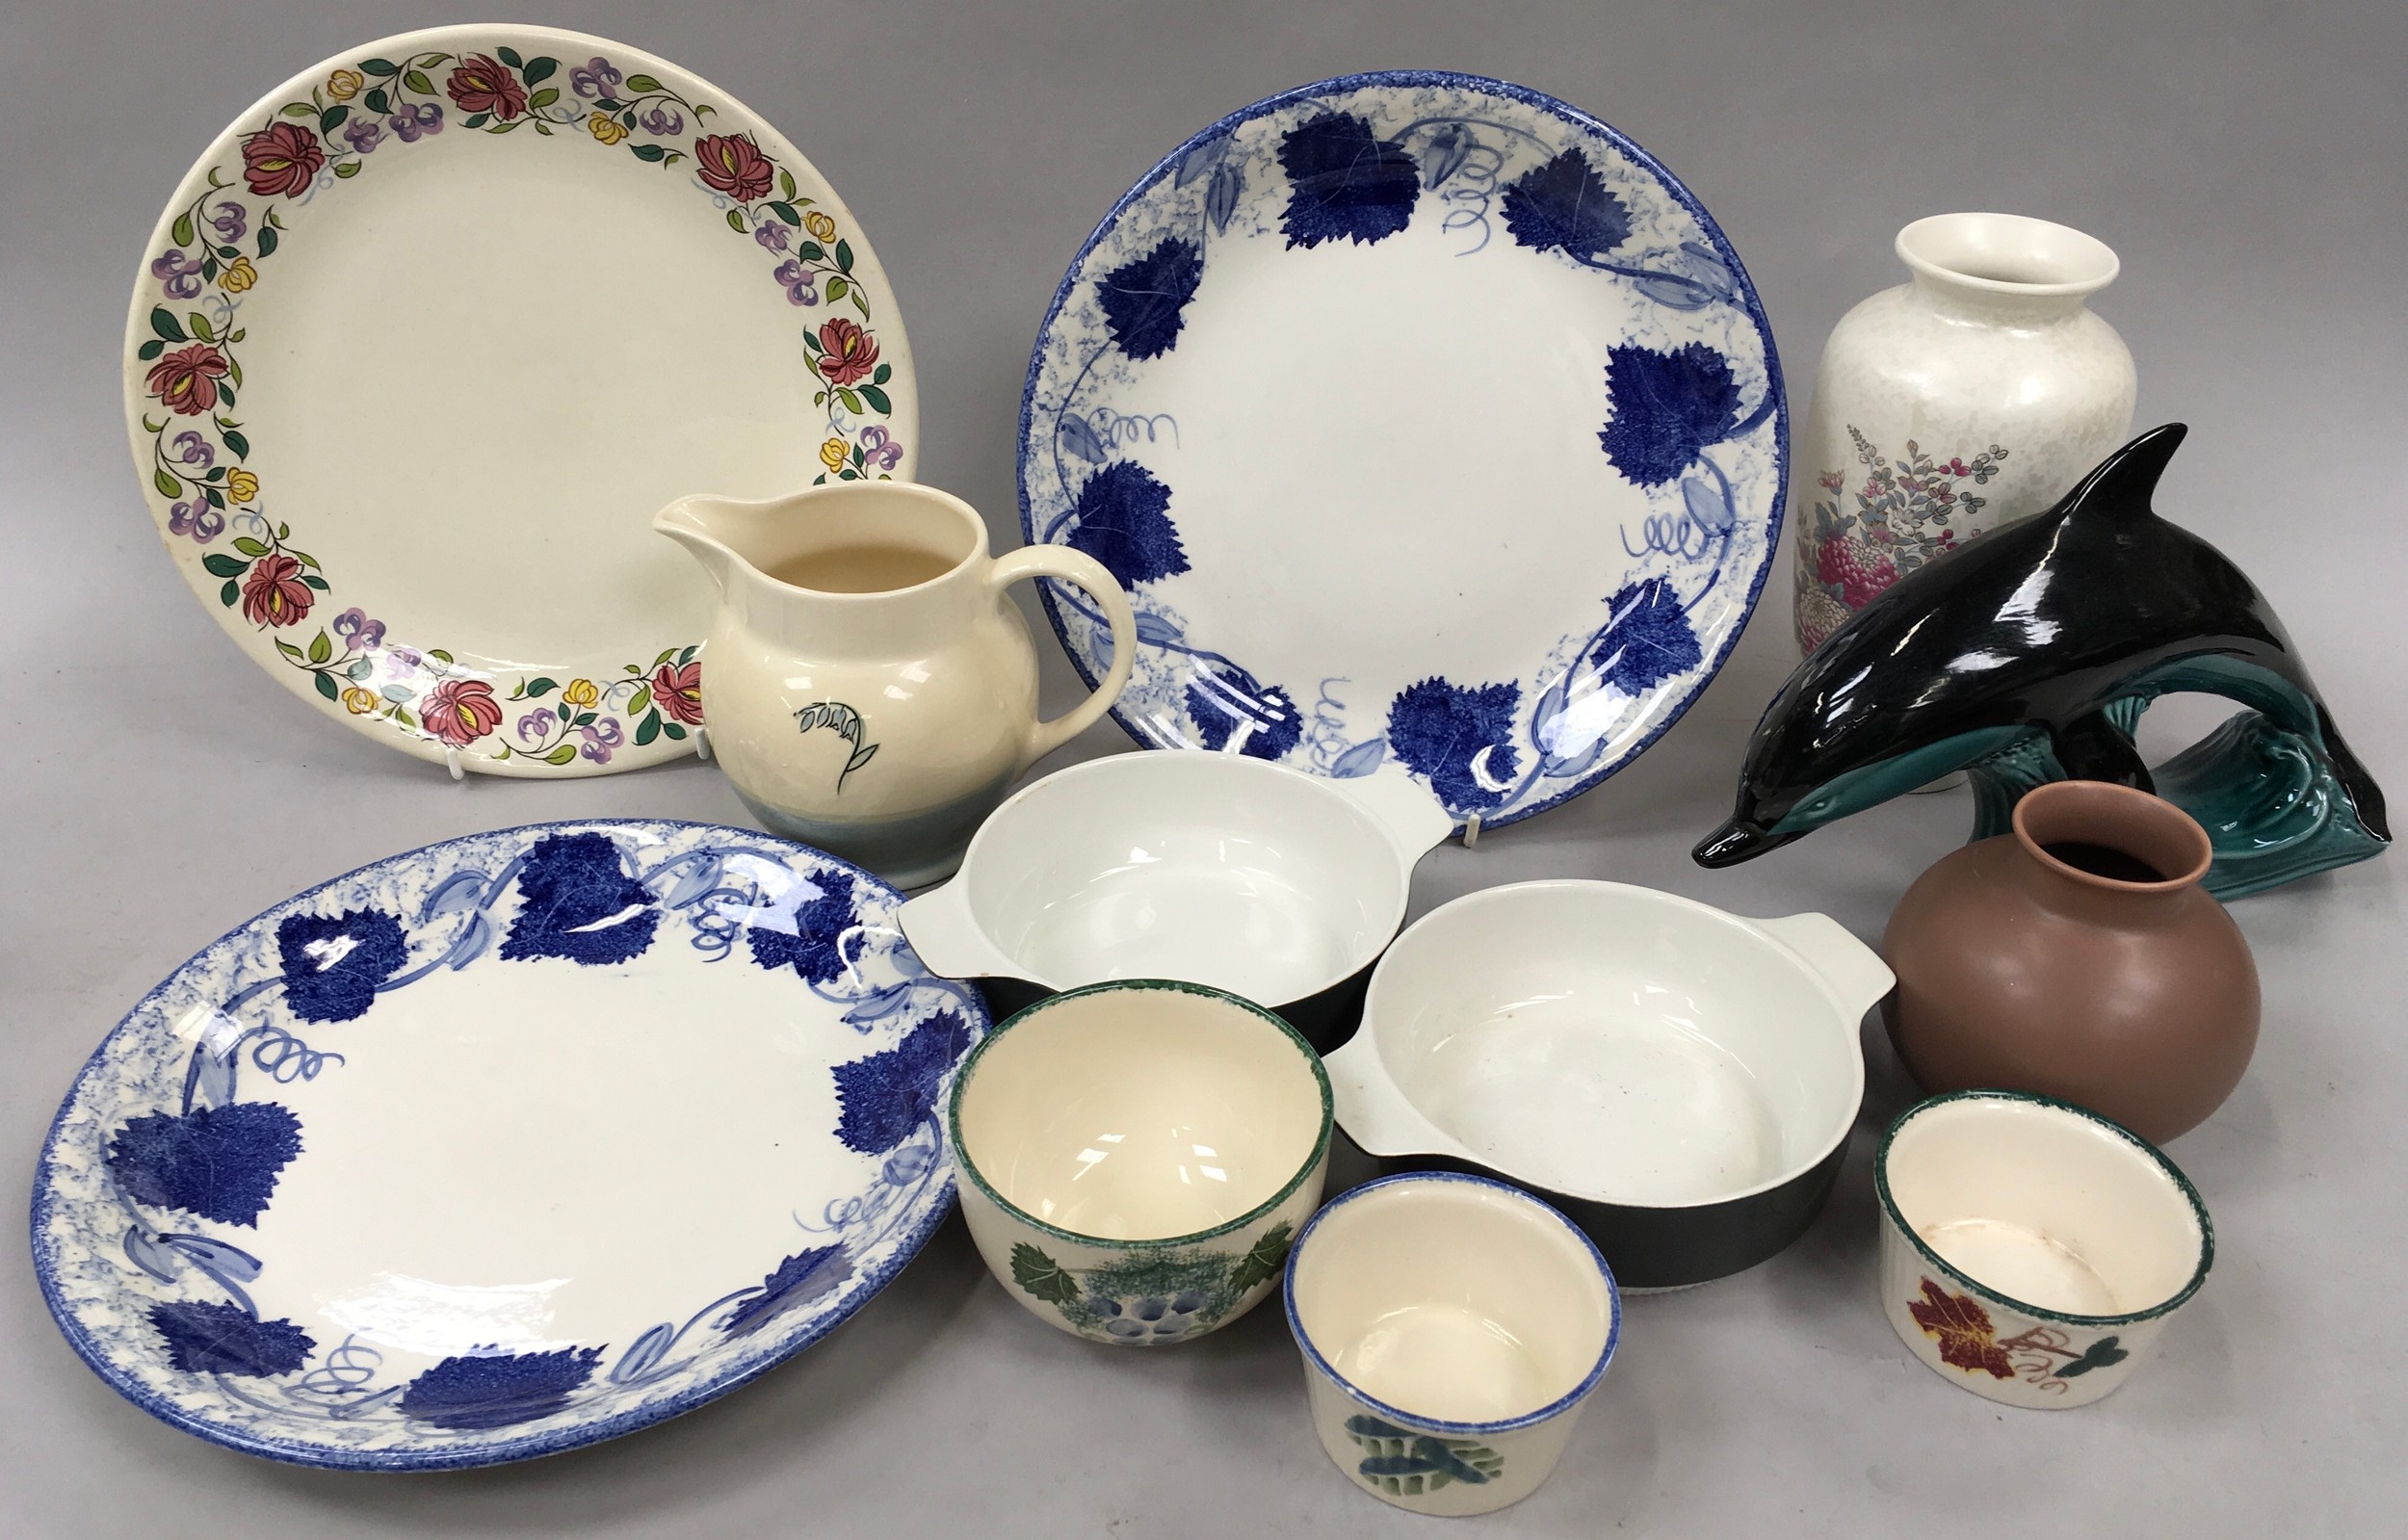 Quantity of Poole Pottery to include large blue and white plates